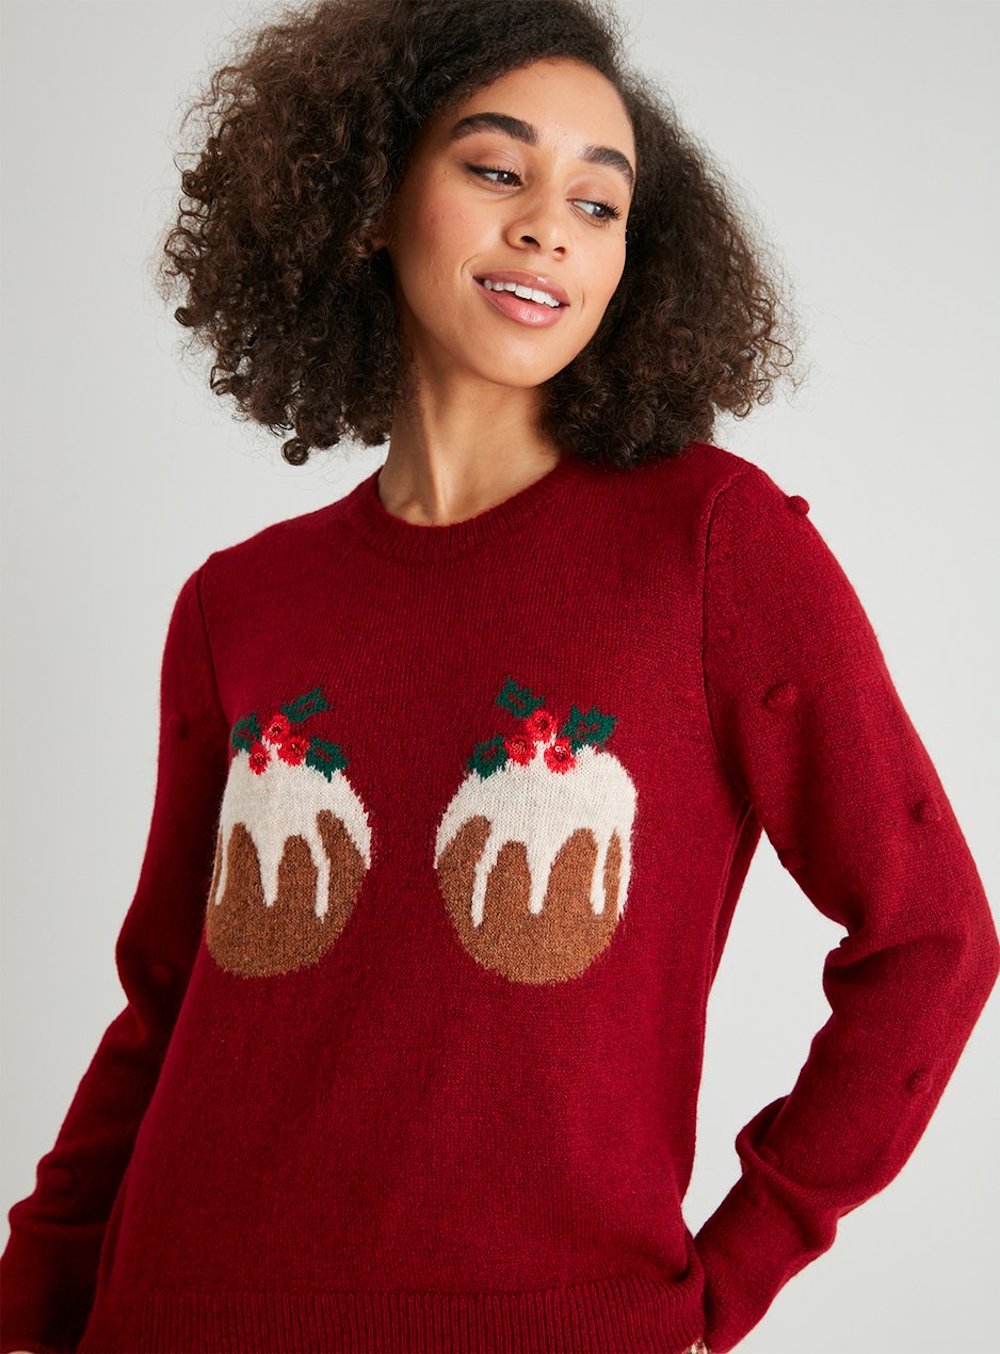 Festive fashion: Christmas jumpers to buy now